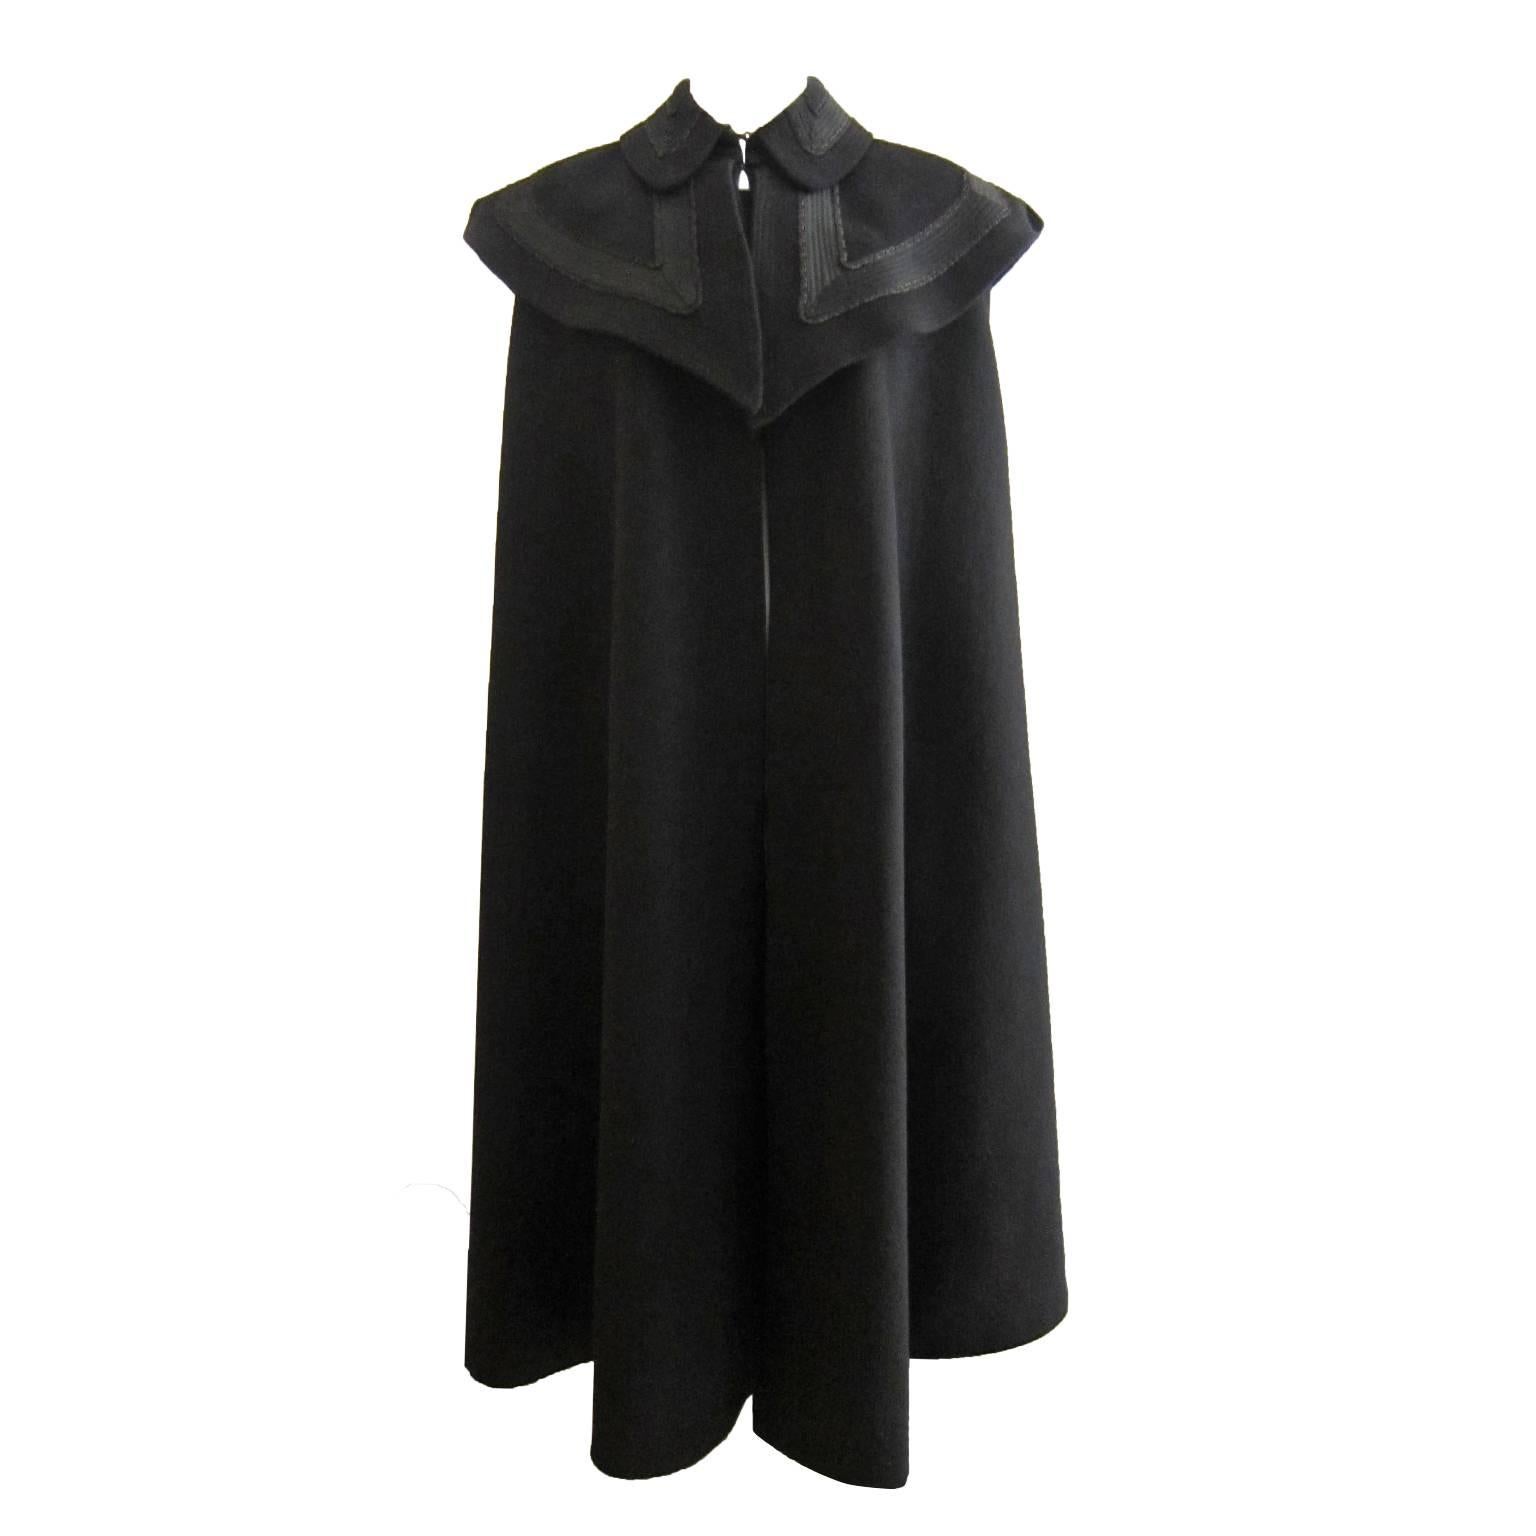 Elegant black wool cape from circa 1970s. With detailed extra pieces over the shoulders with ribbons and embroidery.  
Fully lined.
One size fits most.
Measurements:
Shoulders : 48 cm
Length 110 cm